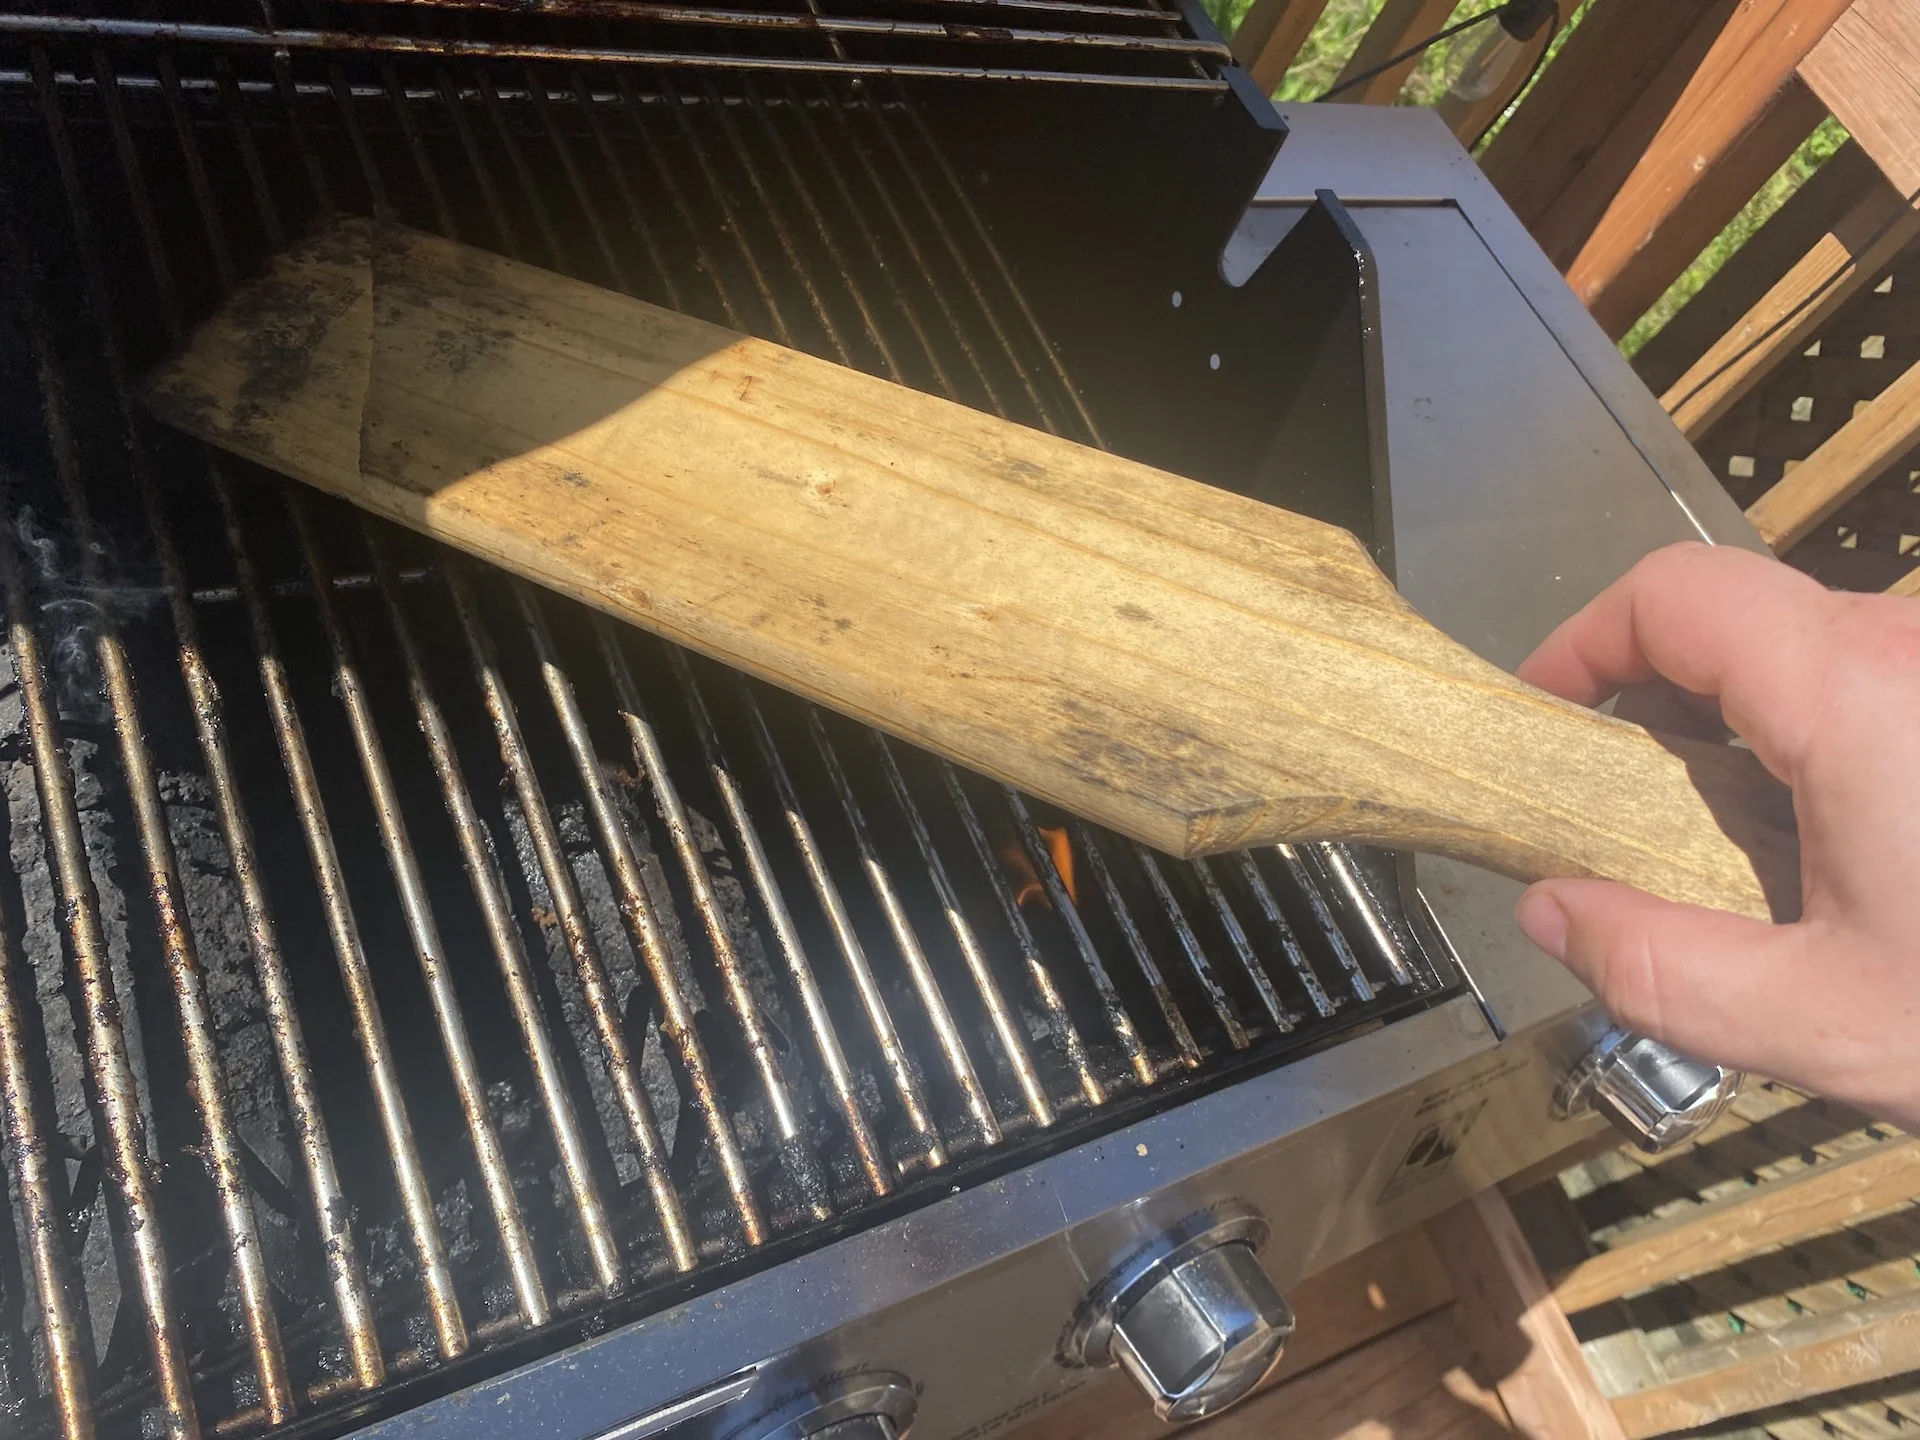 Alternatives to wire bristle grill brushes for safer barbecue season